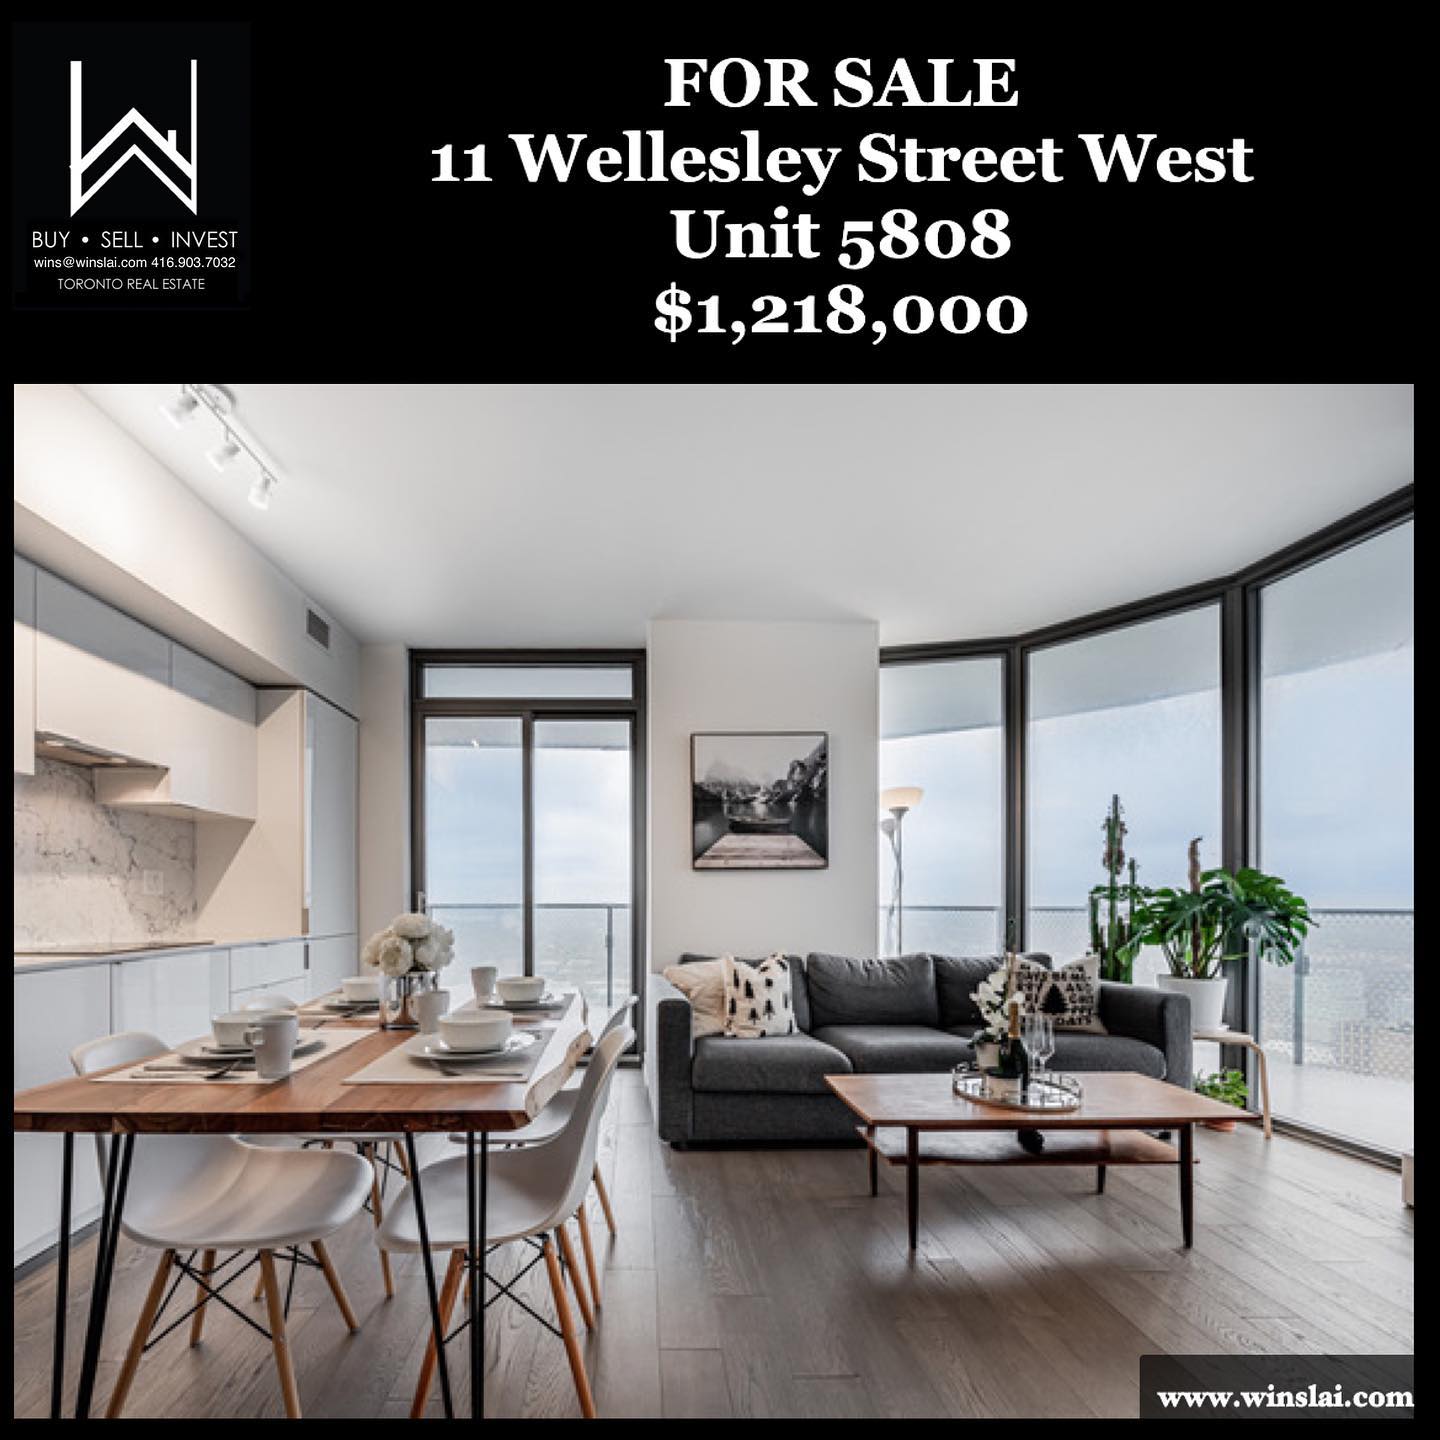 For sale flyer for 11 Wellesley St condo.